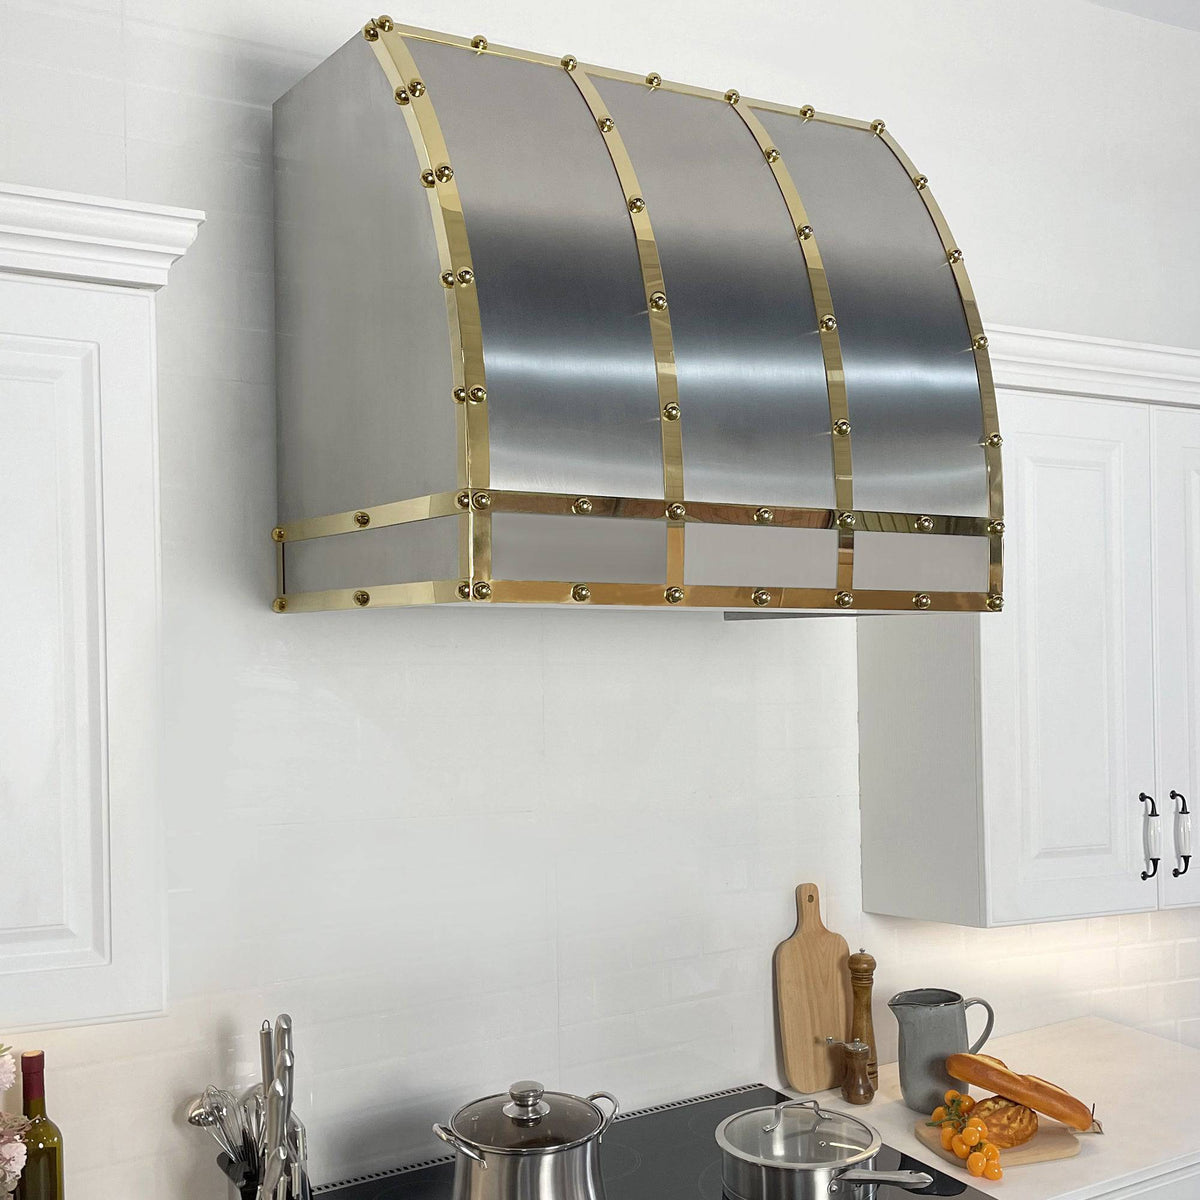 Fobest Barrel Design Custom Stainless Steel Range Hood with Mirror Gold Accent FSS-23 - Stainless Steel Range Hood-Fobest Appliance